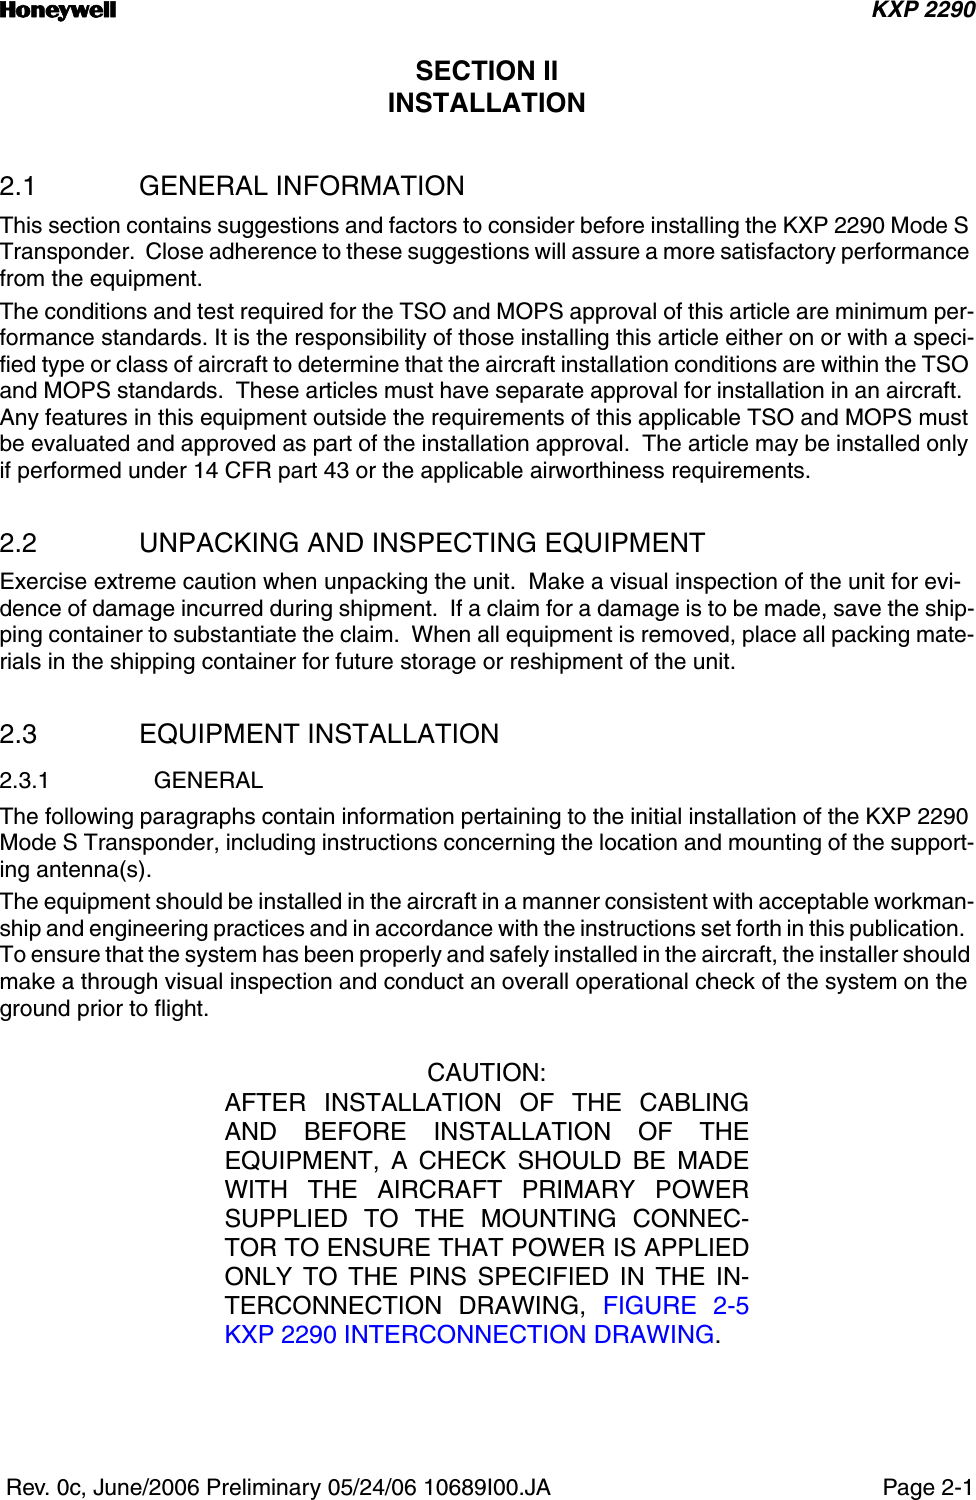 n KXP 2290 Rev. 0c, June/2006 Preliminary 05/24/06 10689I00.JA Page 2-1SECTION IIINSTALLATION2.1 GENERAL INFORMATIONThis section contains suggestions and factors to consider before installing the KXP 2290 Mode S Transponder.  Close adherence to these suggestions will assure a more satisfactory performance from the equipment.The conditions and test required for the TSO and MOPS approval of this article are minimum per-formance standards. It is the responsibility of those installing this article either on or with a speci-fied type or class of aircraft to determine that the aircraft installation conditions are within the TSO and MOPS standards.  These articles must have separate approval for installation in an aircraft.  Any features in this equipment outside the requirements of this applicable TSO and MOPS must be evaluated and approved as part of the installation approval.  The article may be installed only if performed under 14 CFR part 43 or the applicable airworthiness requirements. 2.2 UNPACKING AND INSPECTING EQUIPMENTExercise extreme caution when unpacking the unit.  Make a visual inspection of the unit for evi-dence of damage incurred during shipment.  If a claim for a damage is to be made, save the ship-ping container to substantiate the claim.  When all equipment is removed, place all packing mate-rials in the shipping container for future storage or reshipment of the unit.2.3 EQUIPMENT INSTALLATION2.3.1 GENERALThe following paragraphs contain information pertaining to the initial installation of the KXP 2290 Mode S Transponder, including instructions concerning the location and mounting of the support-ing antenna(s).The equipment should be installed in the aircraft in a manner consistent with acceptable workman-ship and engineering practices and in accordance with the instructions set forth in this publication.  To ensure that the system has been properly and safely installed in the aircraft, the installer should make a through visual inspection and conduct an overall operational check of the system on the ground prior to flight.CAUTION:AFTER INSTALLATION OF THE CABLINGAND BEFORE INSTALLATION OF THEEQUIPMENT, A CHECK SHOULD BE MADEWITH THE AIRCRAFT PRIMARY POWERSUPPLIED TO THE MOUNTING CONNEC-TOR TO ENSURE THAT POWER IS APPLIEDONLY TO THE PINS SPECIFIED IN THE IN-TERCONNECTION DRAWING, FIGURE 2-5KXP 2290 INTERCONNECTION DRAWING.